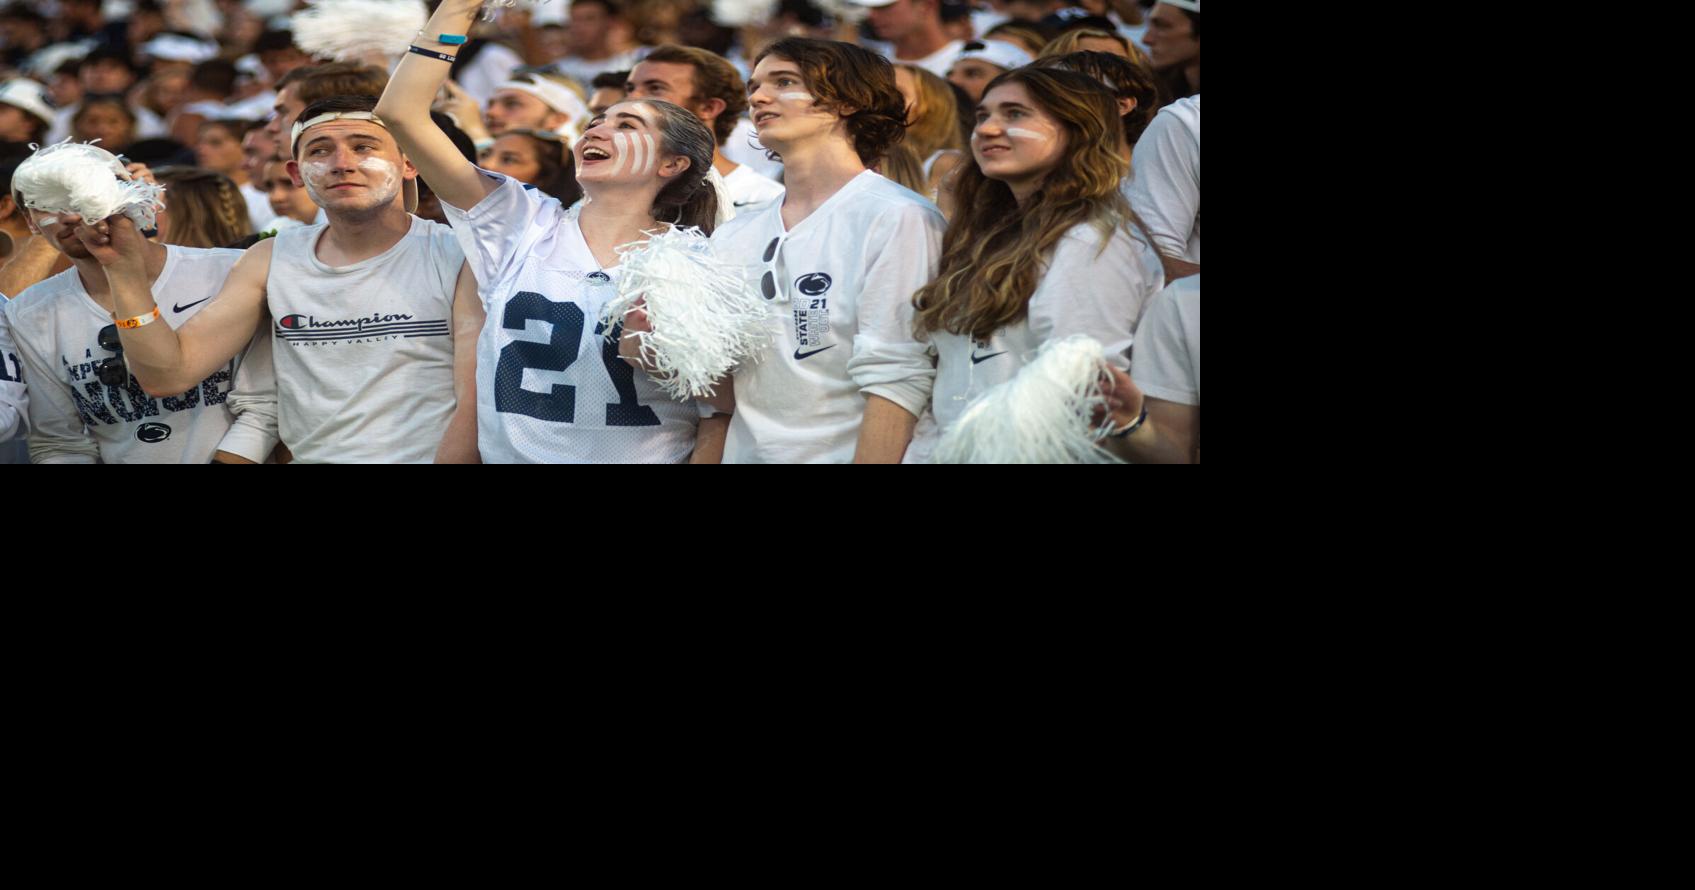 What are Penn State students wearing to the White Out game?